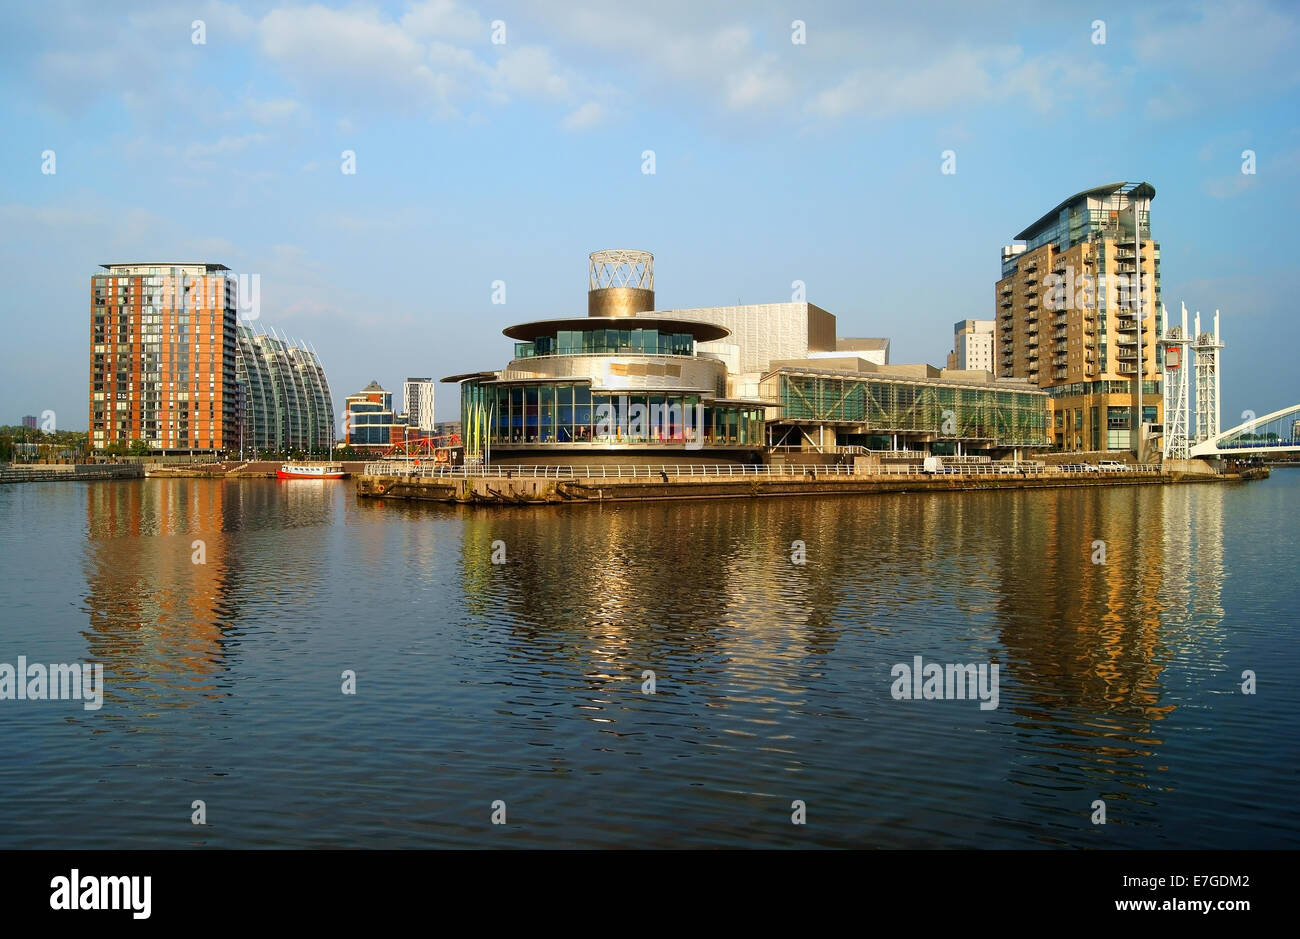 England, Lancashire, Greater Manchester, Salford Quays, Lowry und Manchester Ship Canal Stockfoto